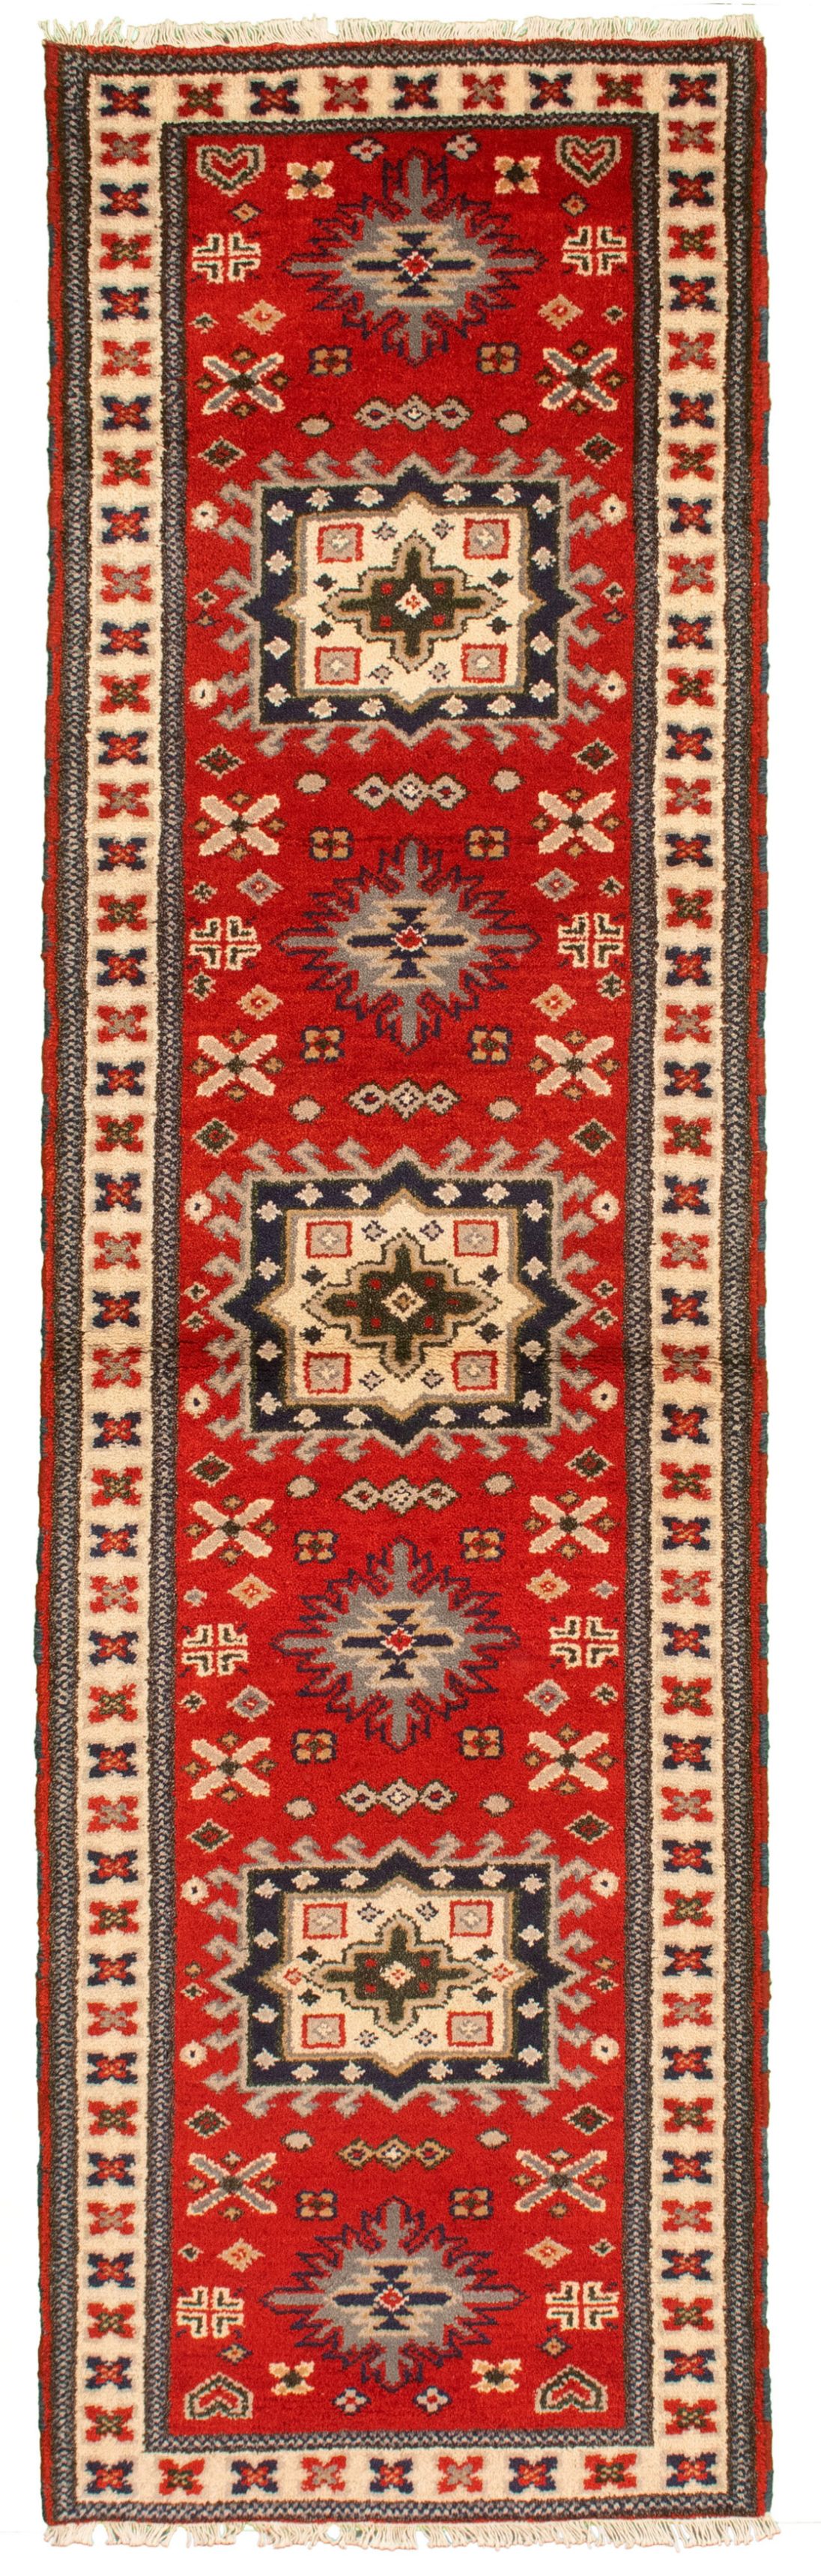 Hand-knotted Royal Kazak Red Wool Rug 2'10" x 9'10"  Size: 2'10" x 9'10"  